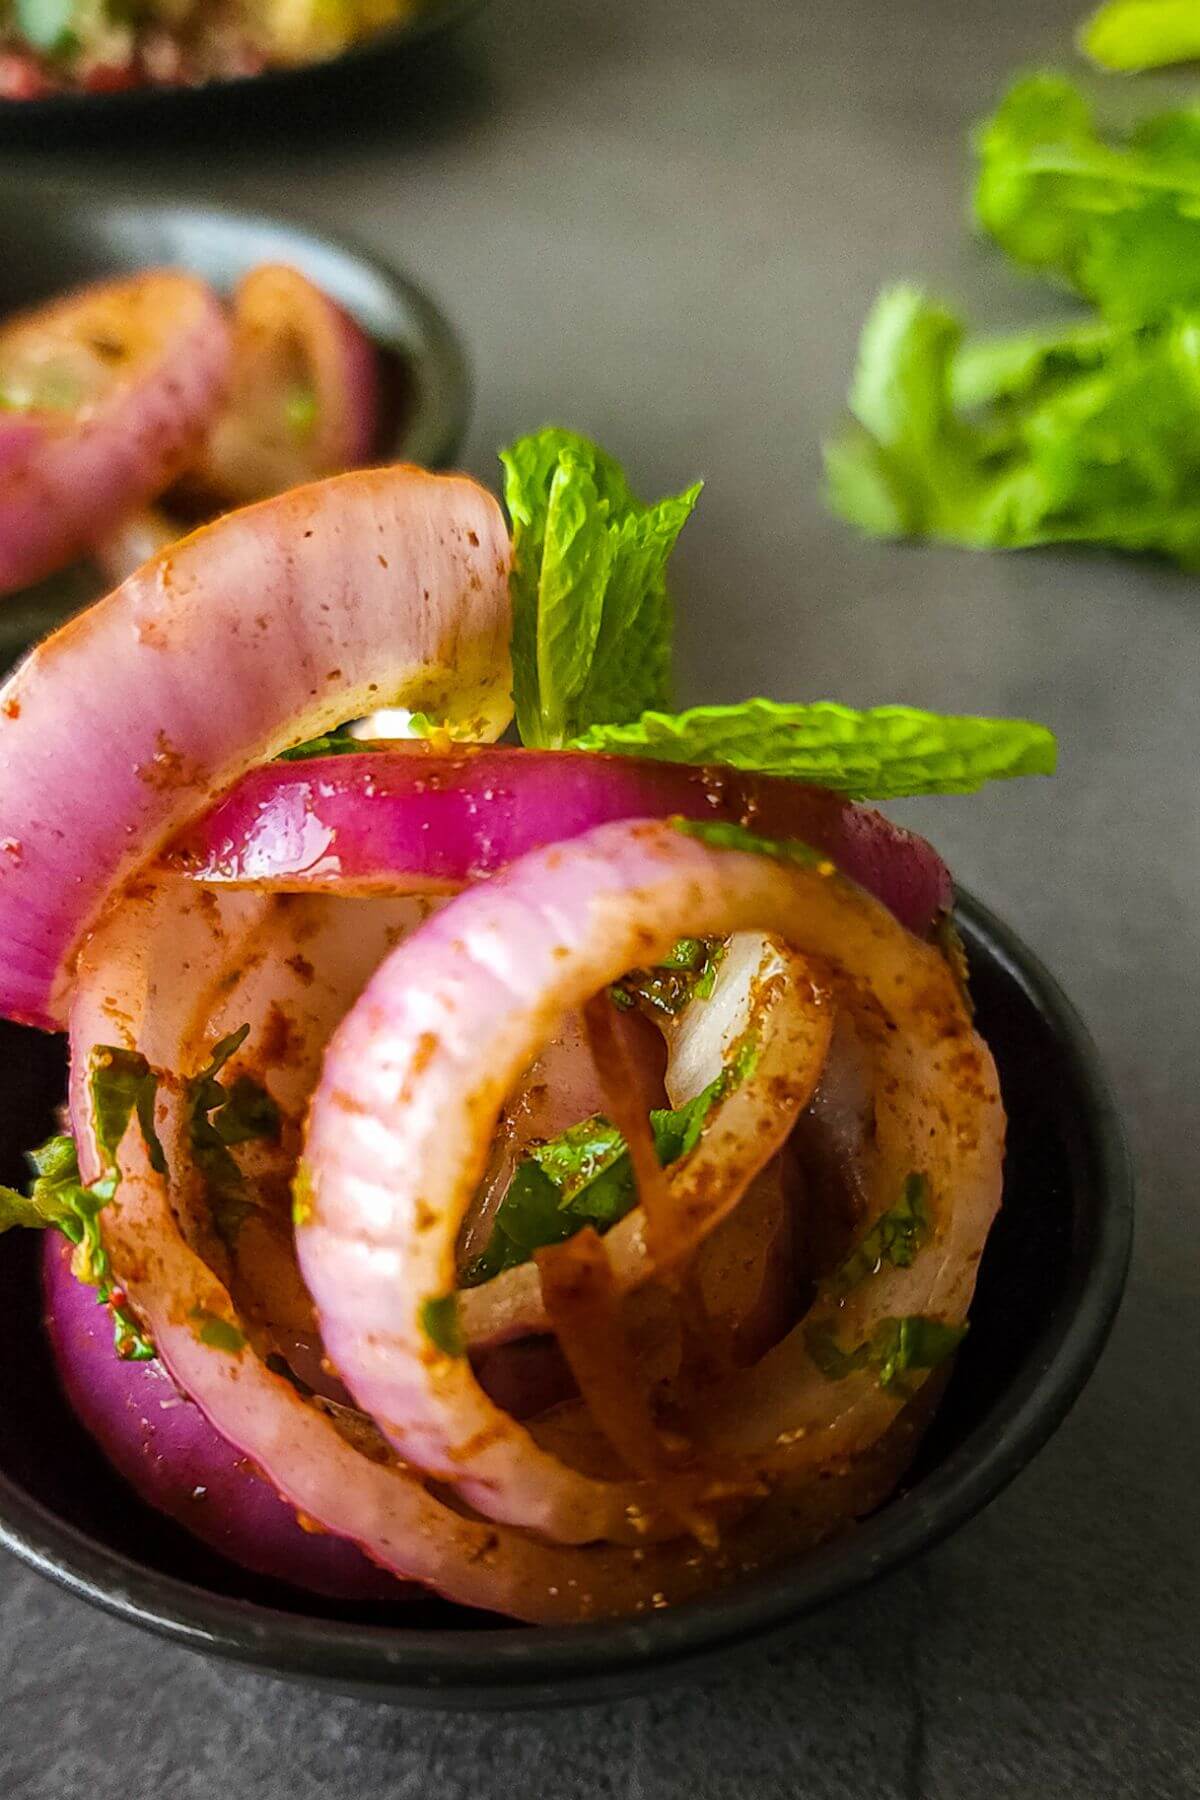 Indian onion salad garnished with mint leaves.